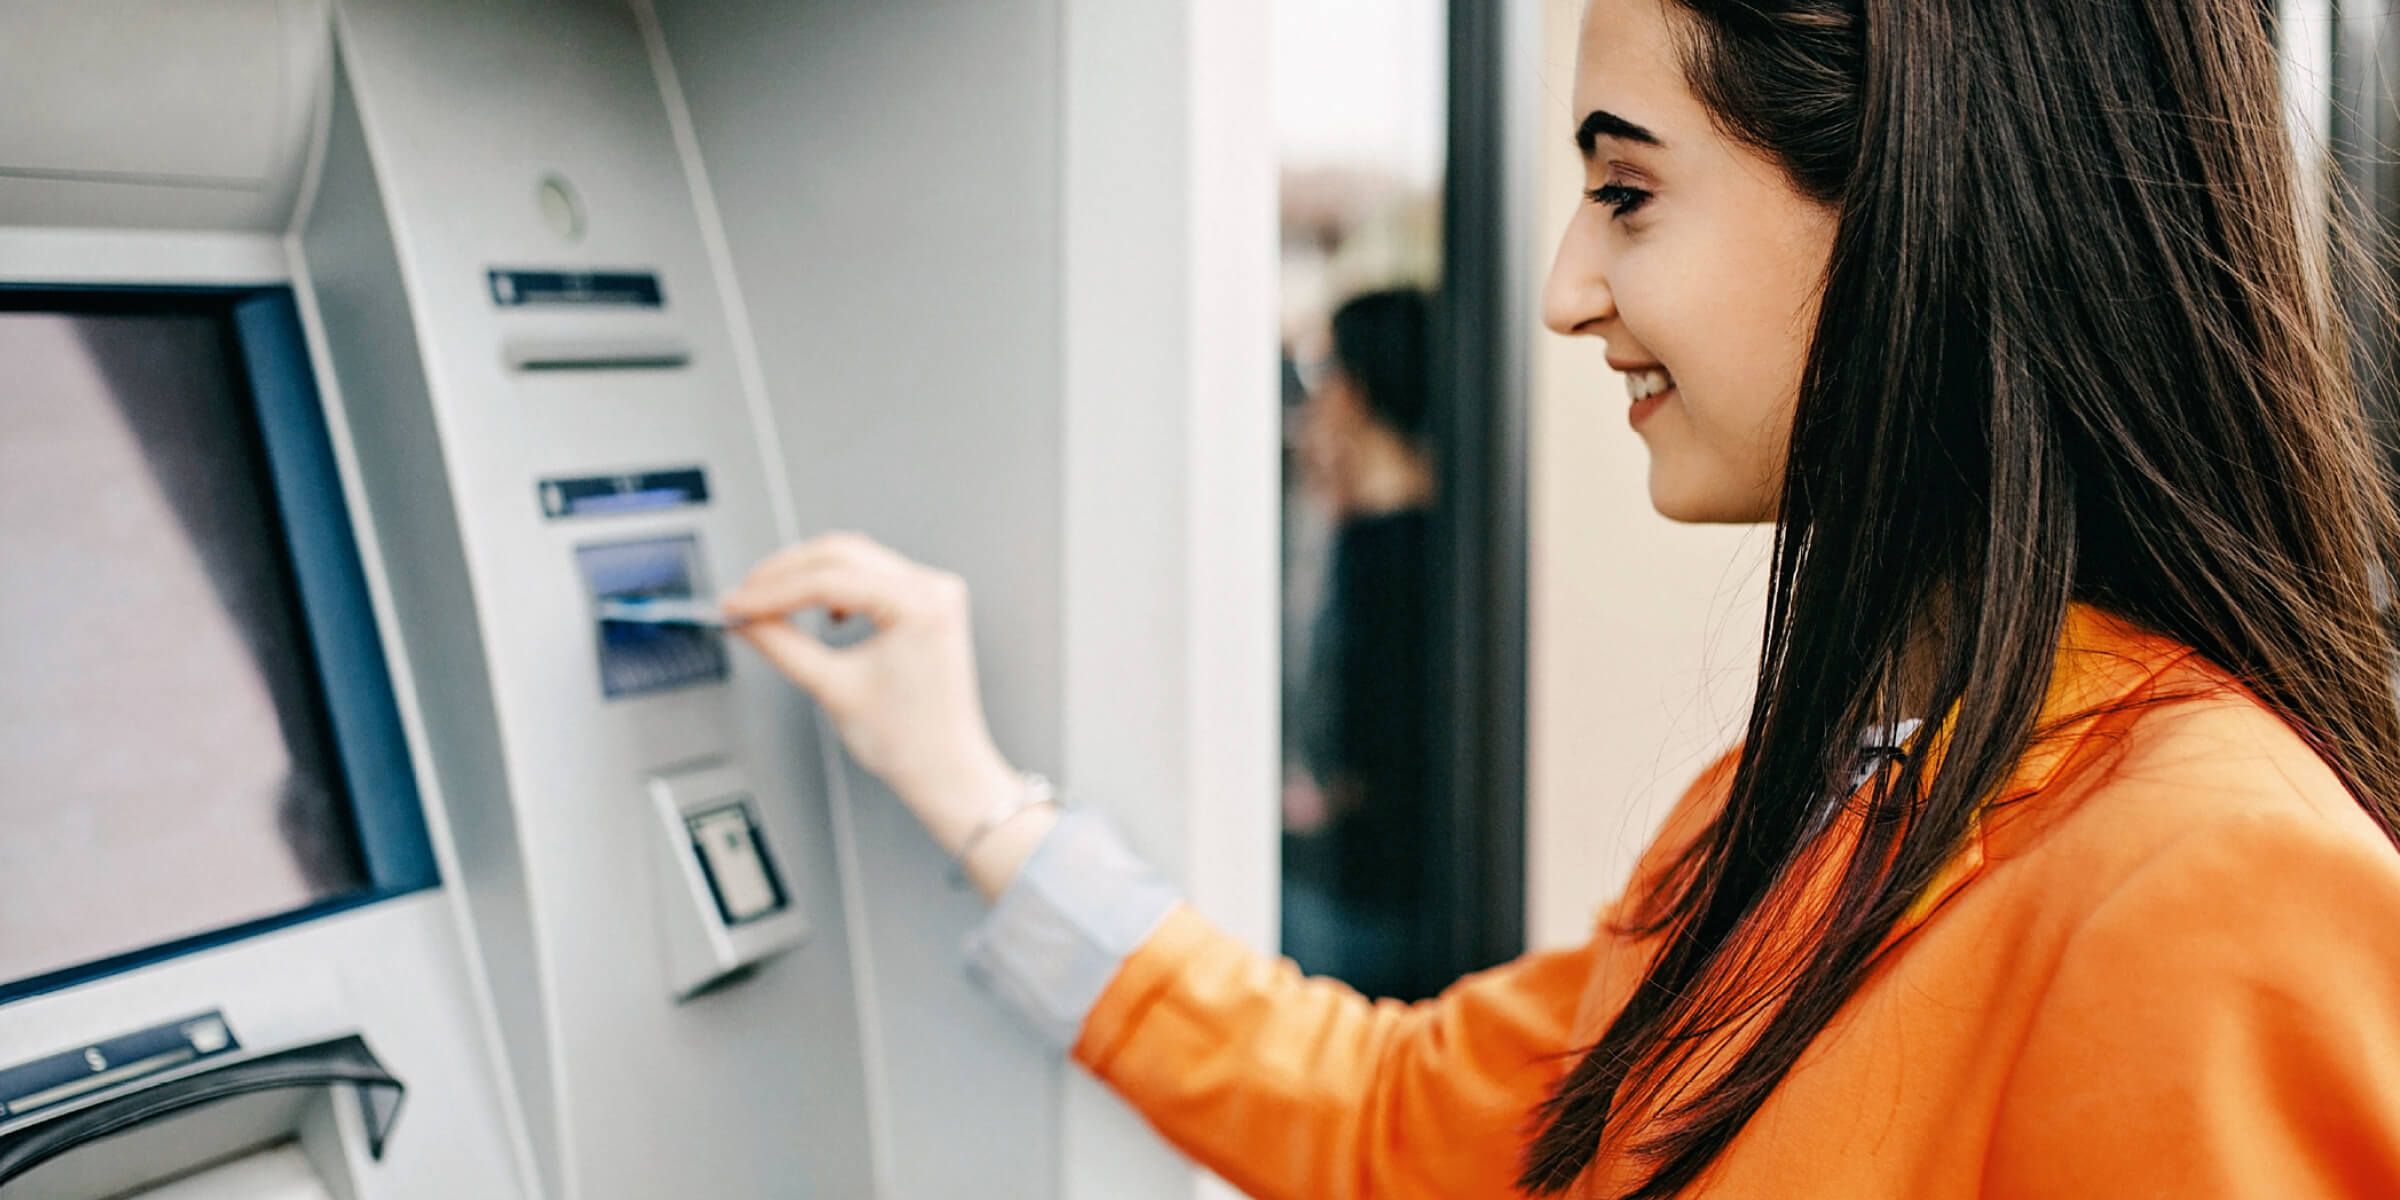 Girl smiling putting her card in an ATM machine